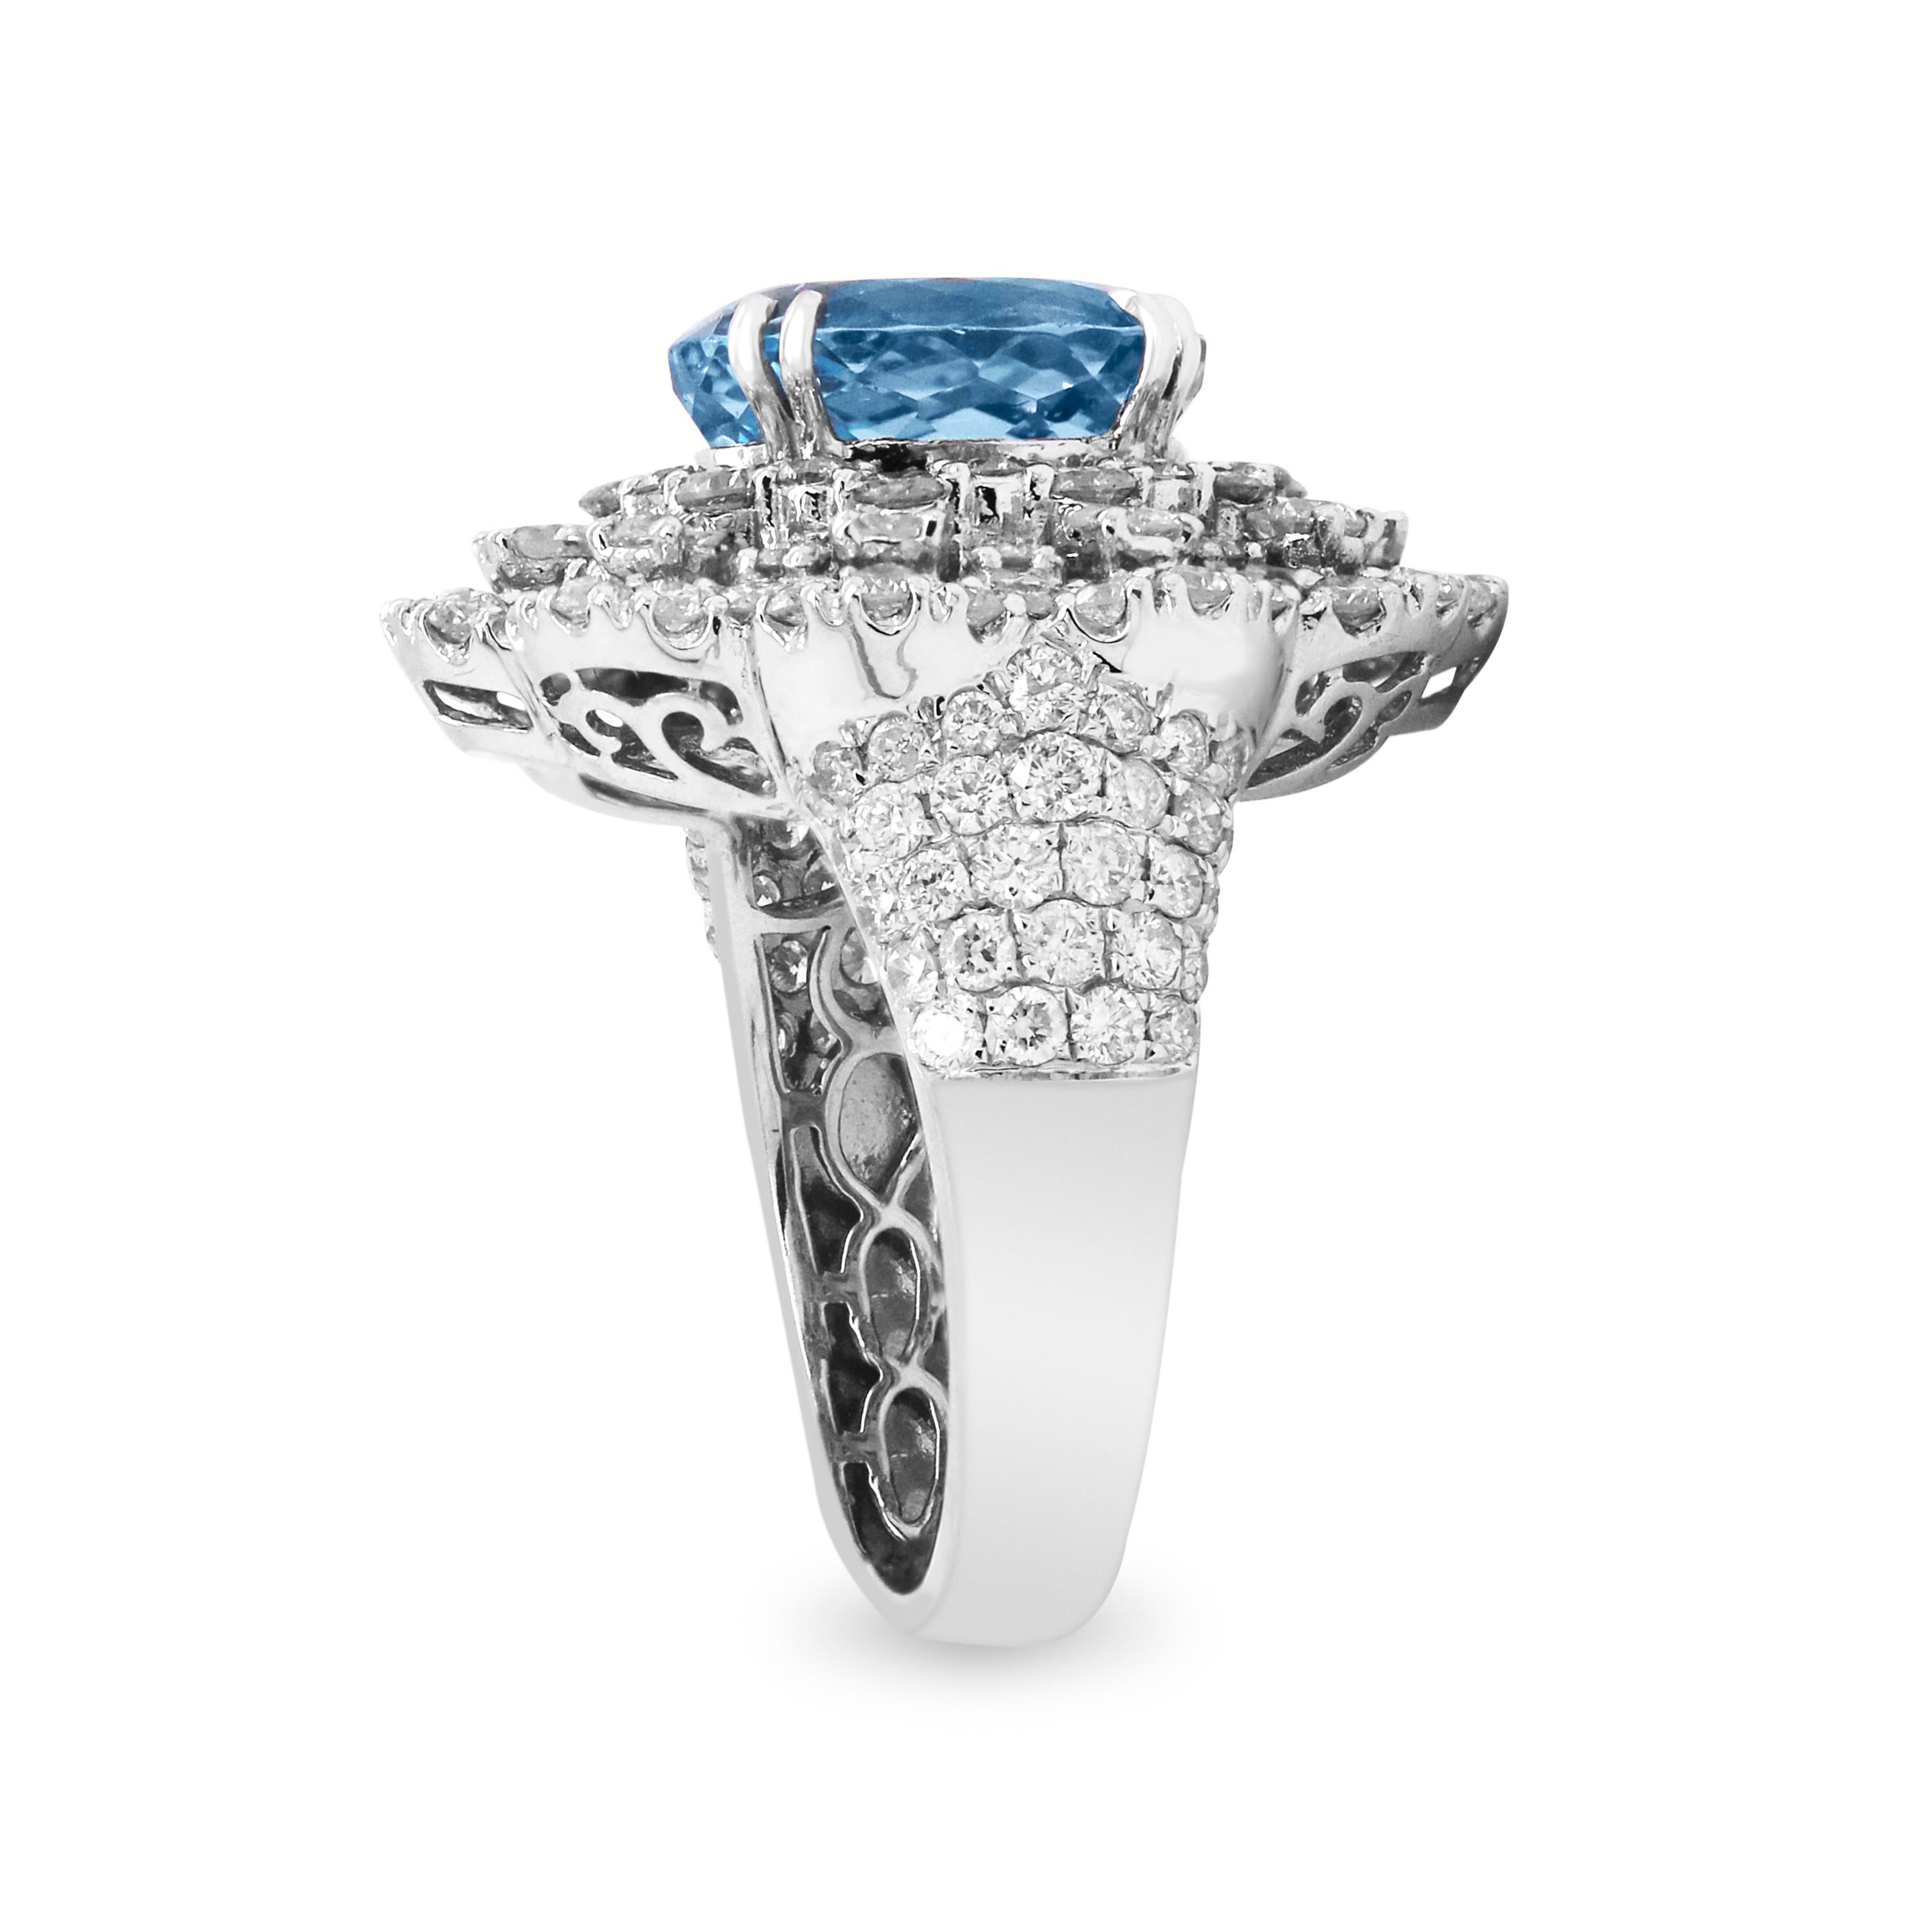 3.09 Carat Oval Cut Aquamarine 18 Karat White Gold Diamond Cocktail Ring In Excellent Condition For Sale In Boca Raton, FL